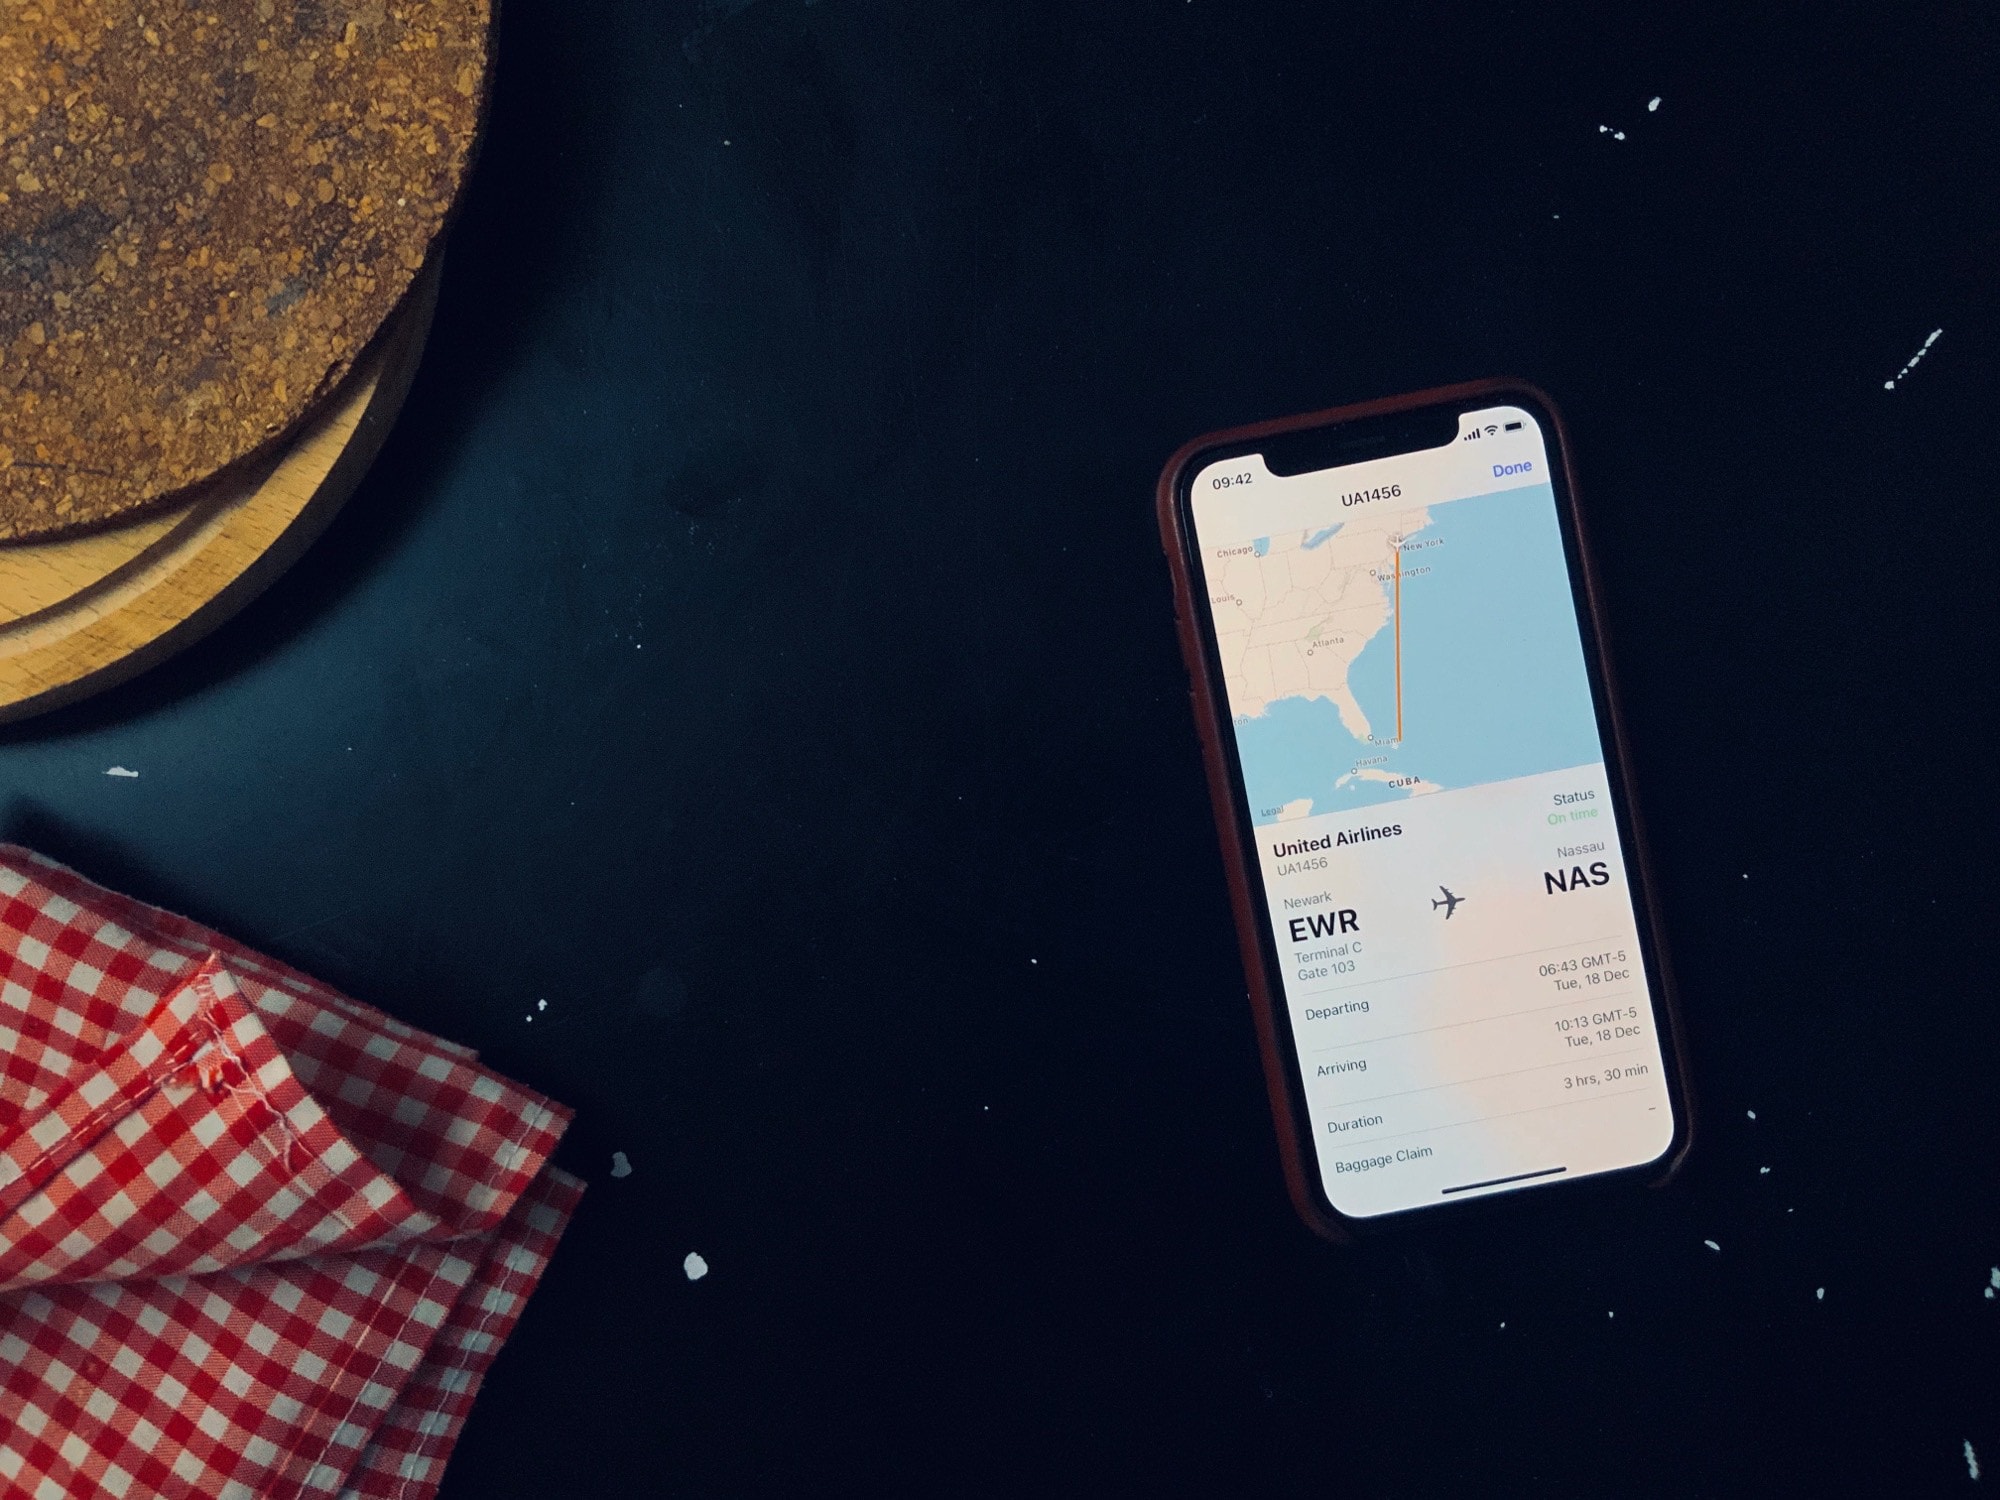 This flight tracker is built into every iPhone and iPad track flights